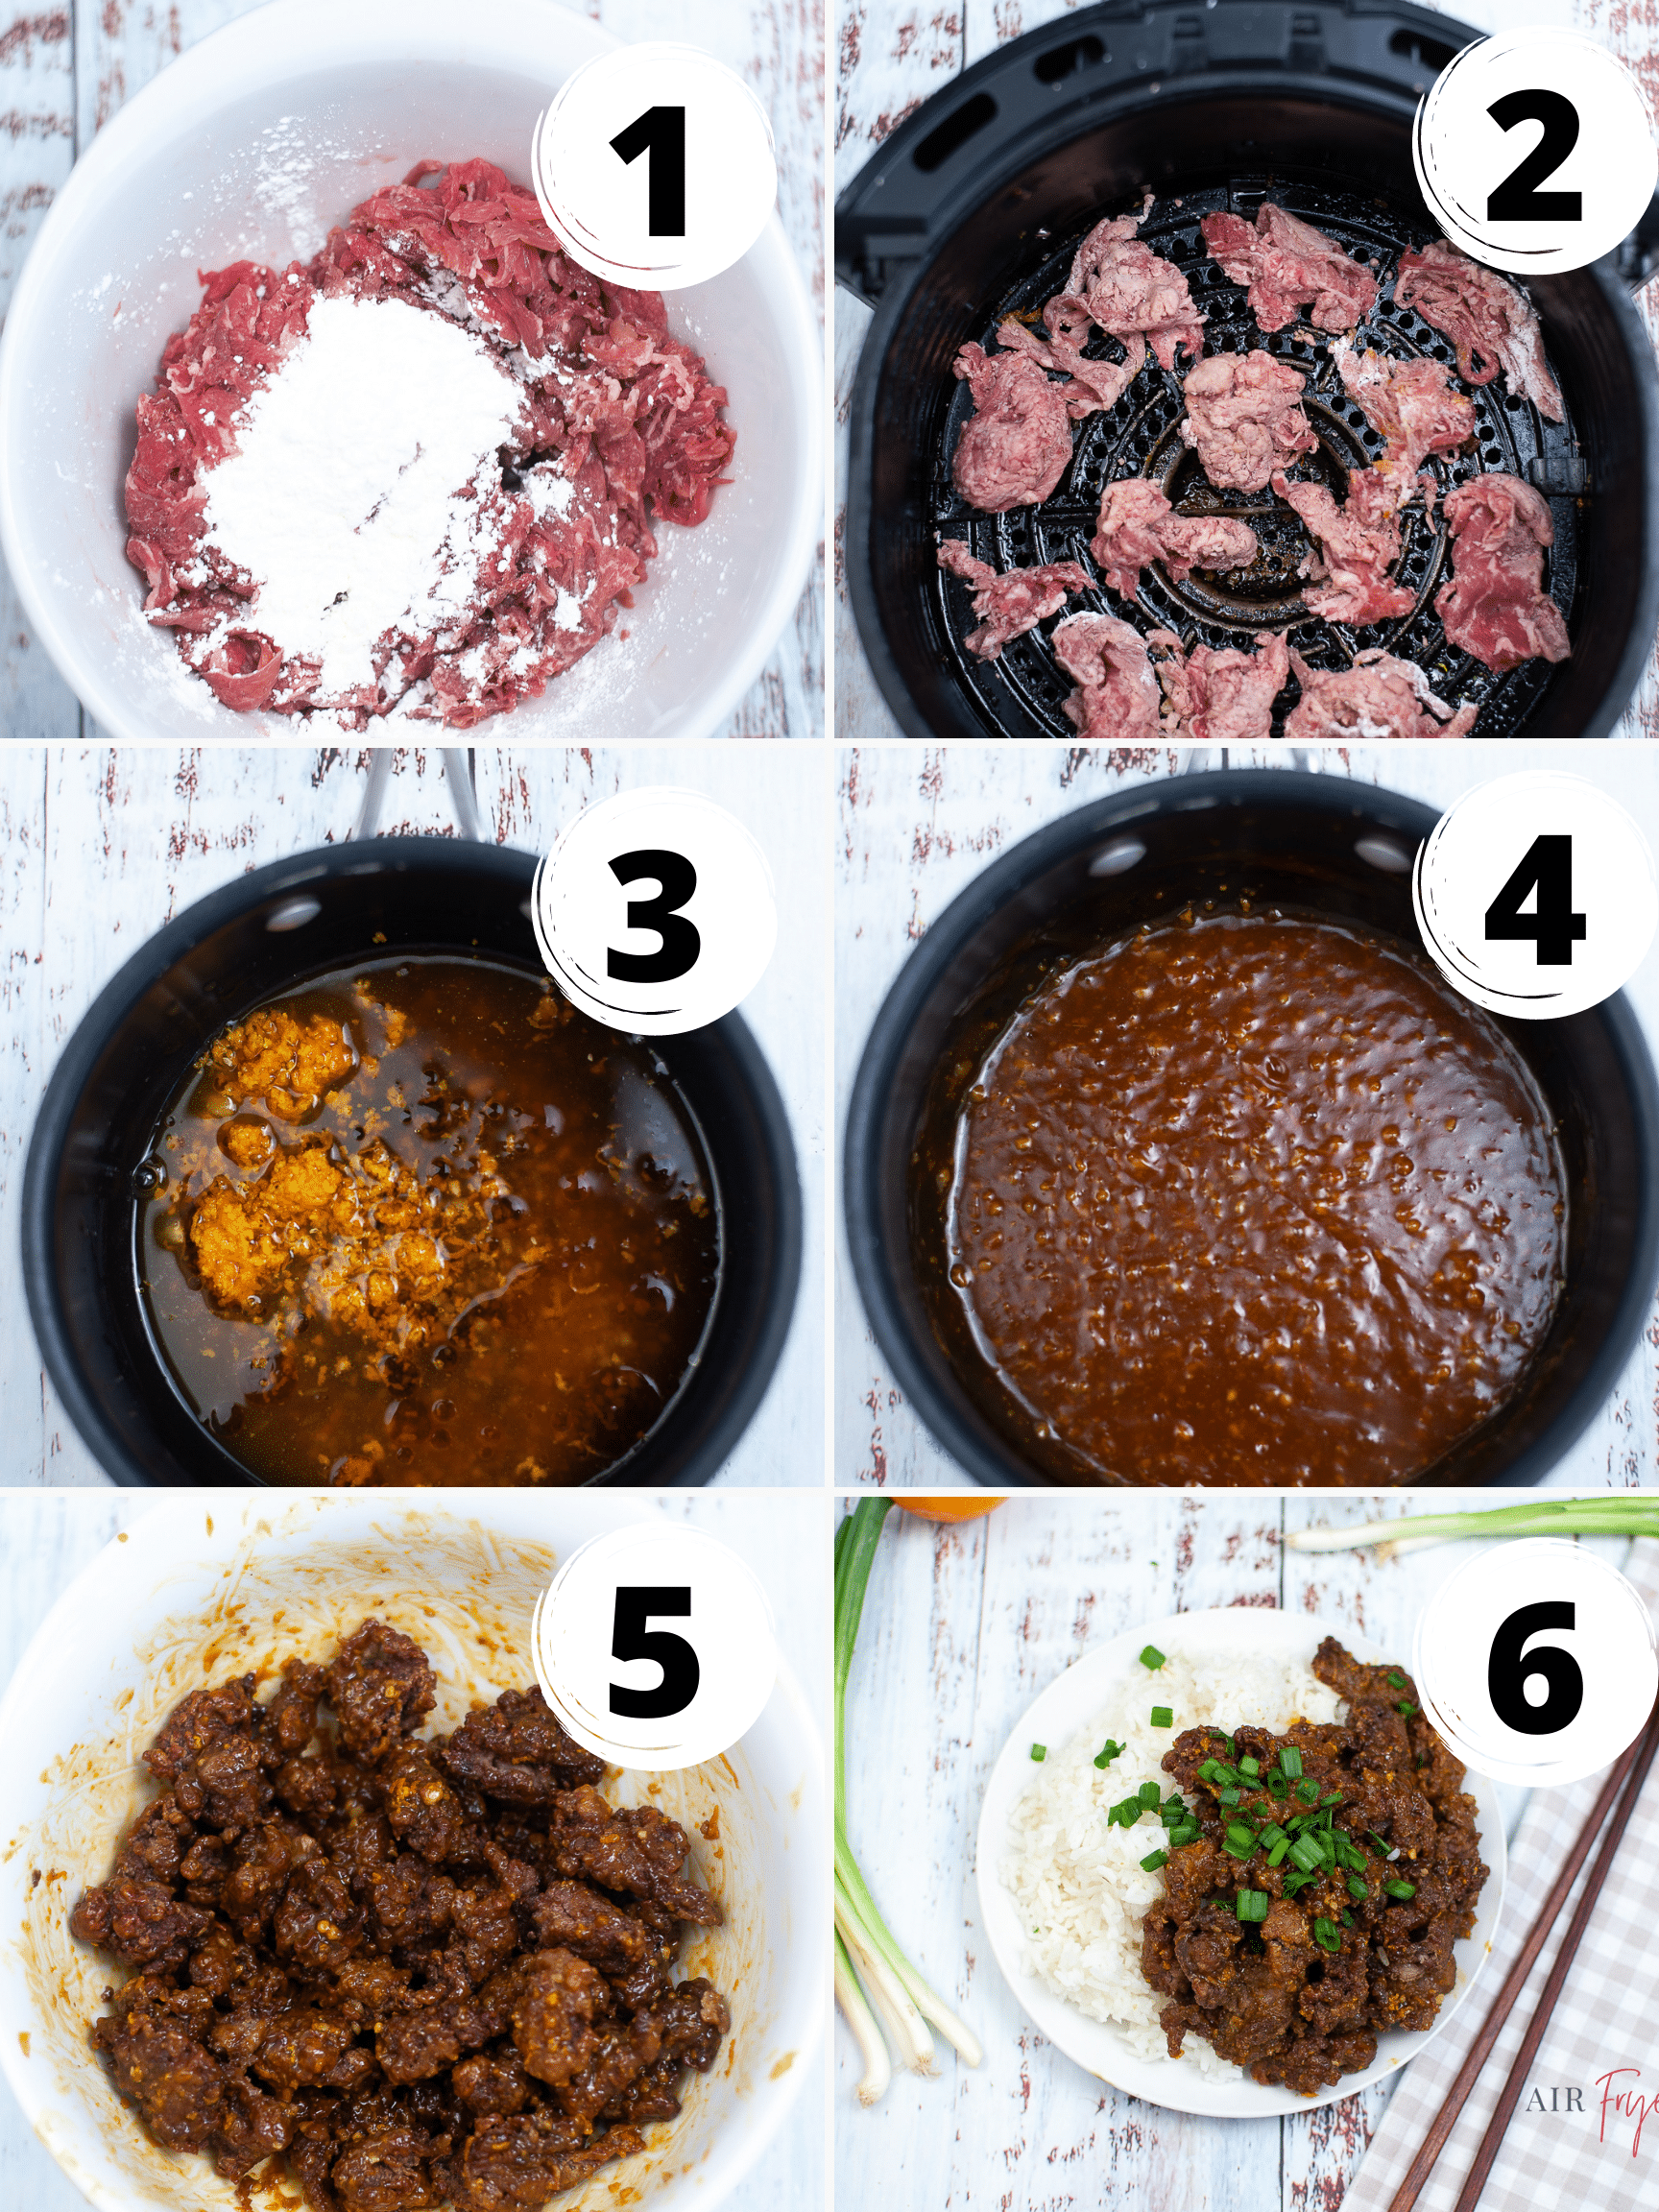 Vertical photo of a 6-step collage showing each step in order to complete the recipe